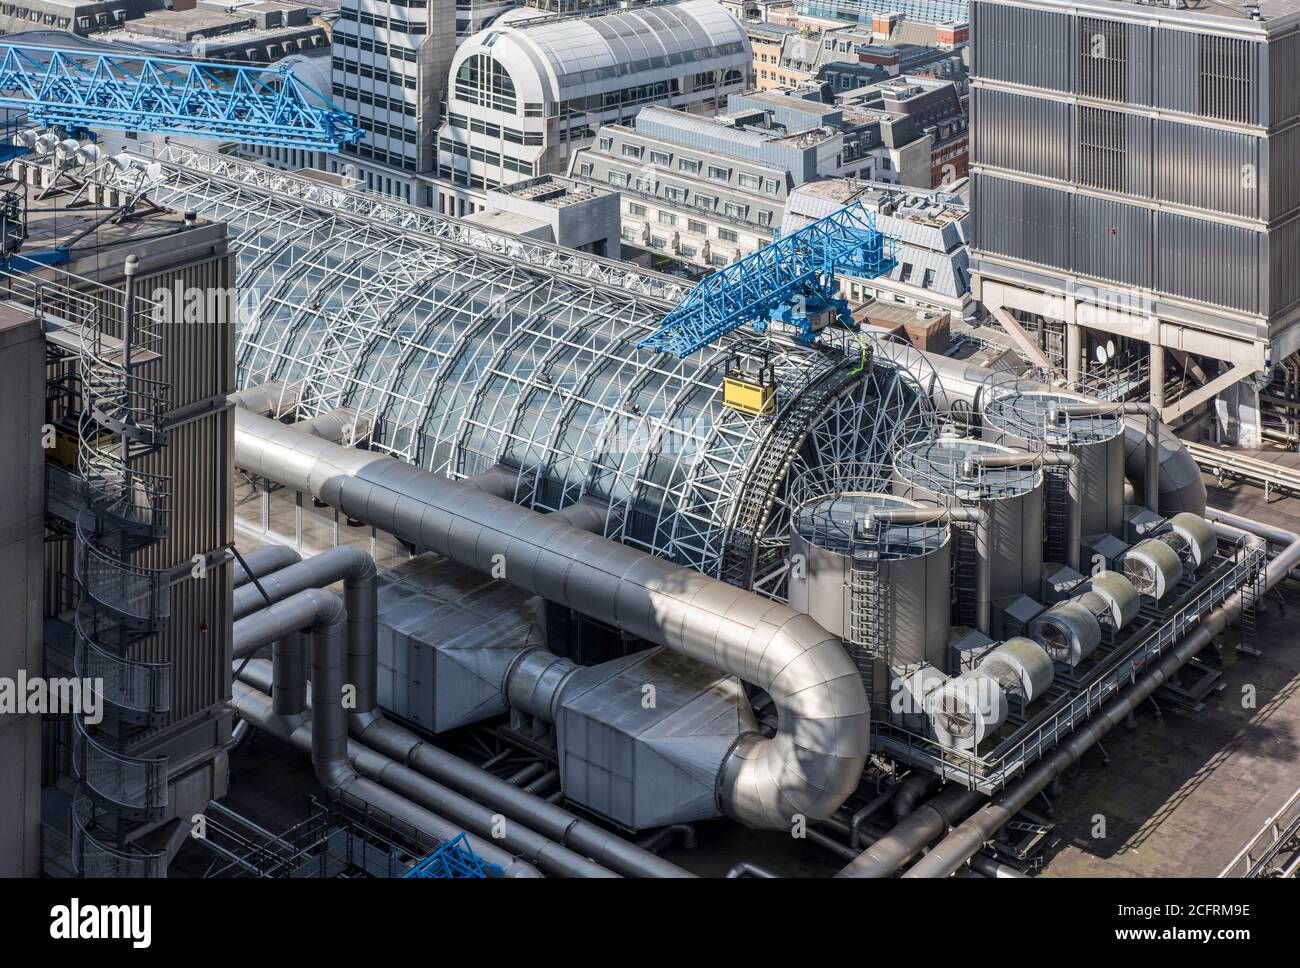 The atrium of the building, seen from the Scalpel. Plant, elevator show blue cleaning cranes are clearly visible. Lloyd's Building, London, United Kin Stock Photo